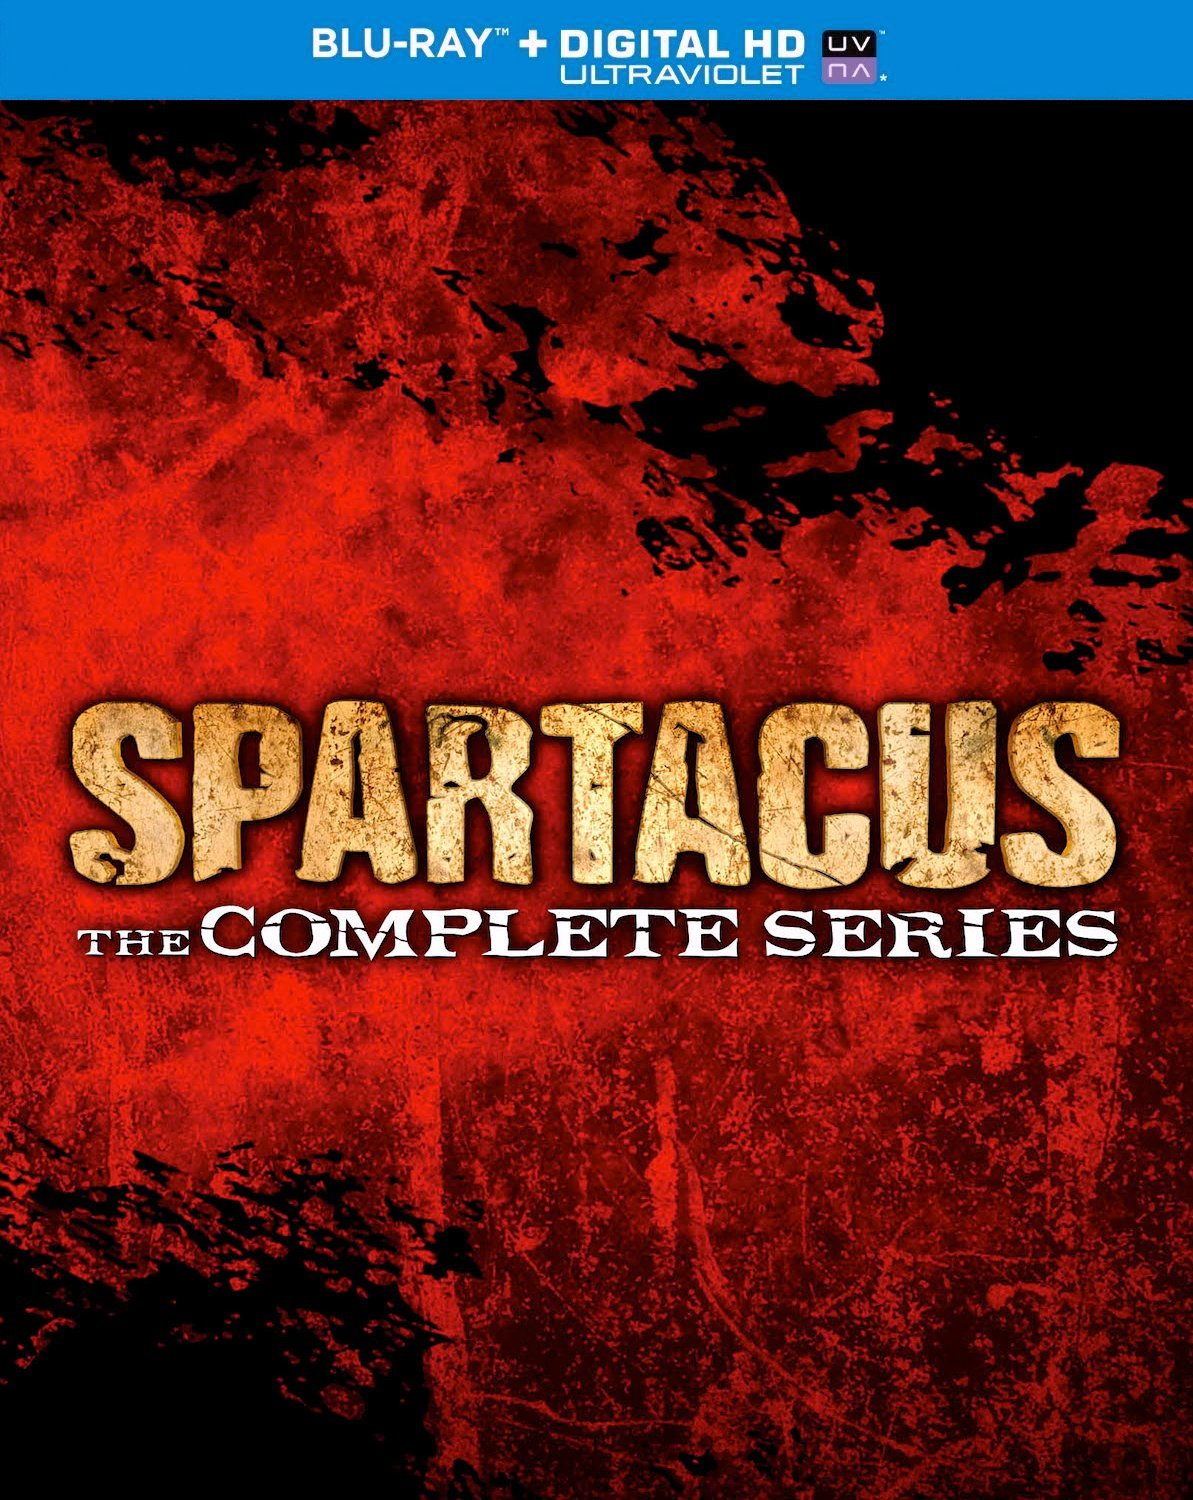 Spartacus: The Complete Collection